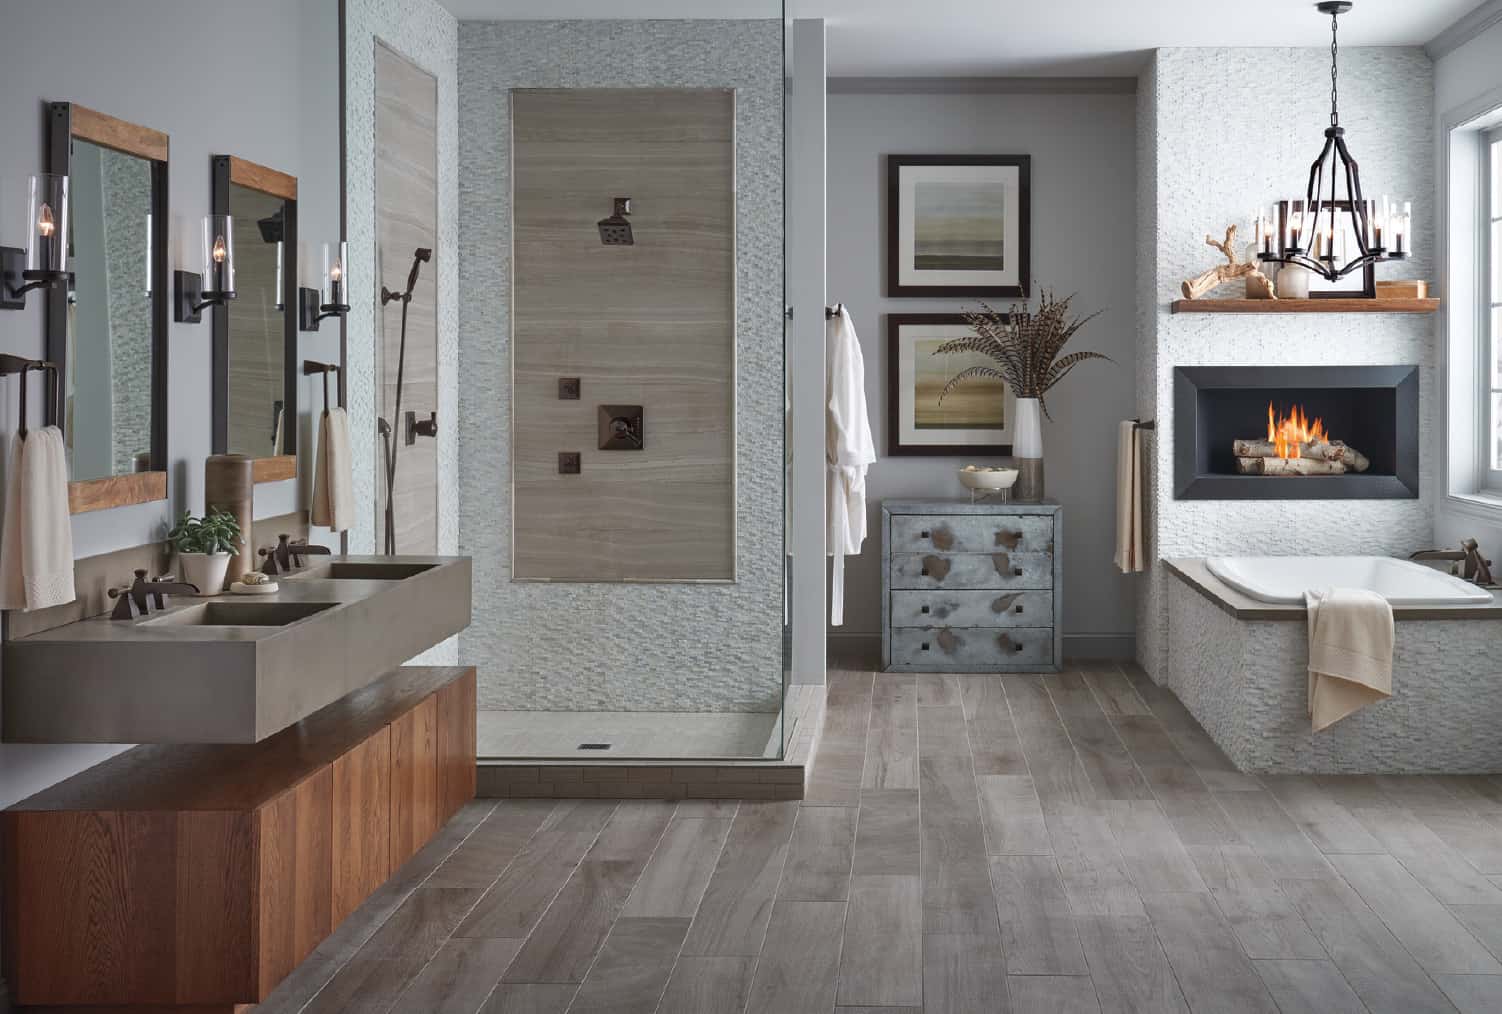 Industrial bathroom renovation ideas including a minimalist bathroom featuring weathered wood, stone and tile all tied together with wrought iron accents